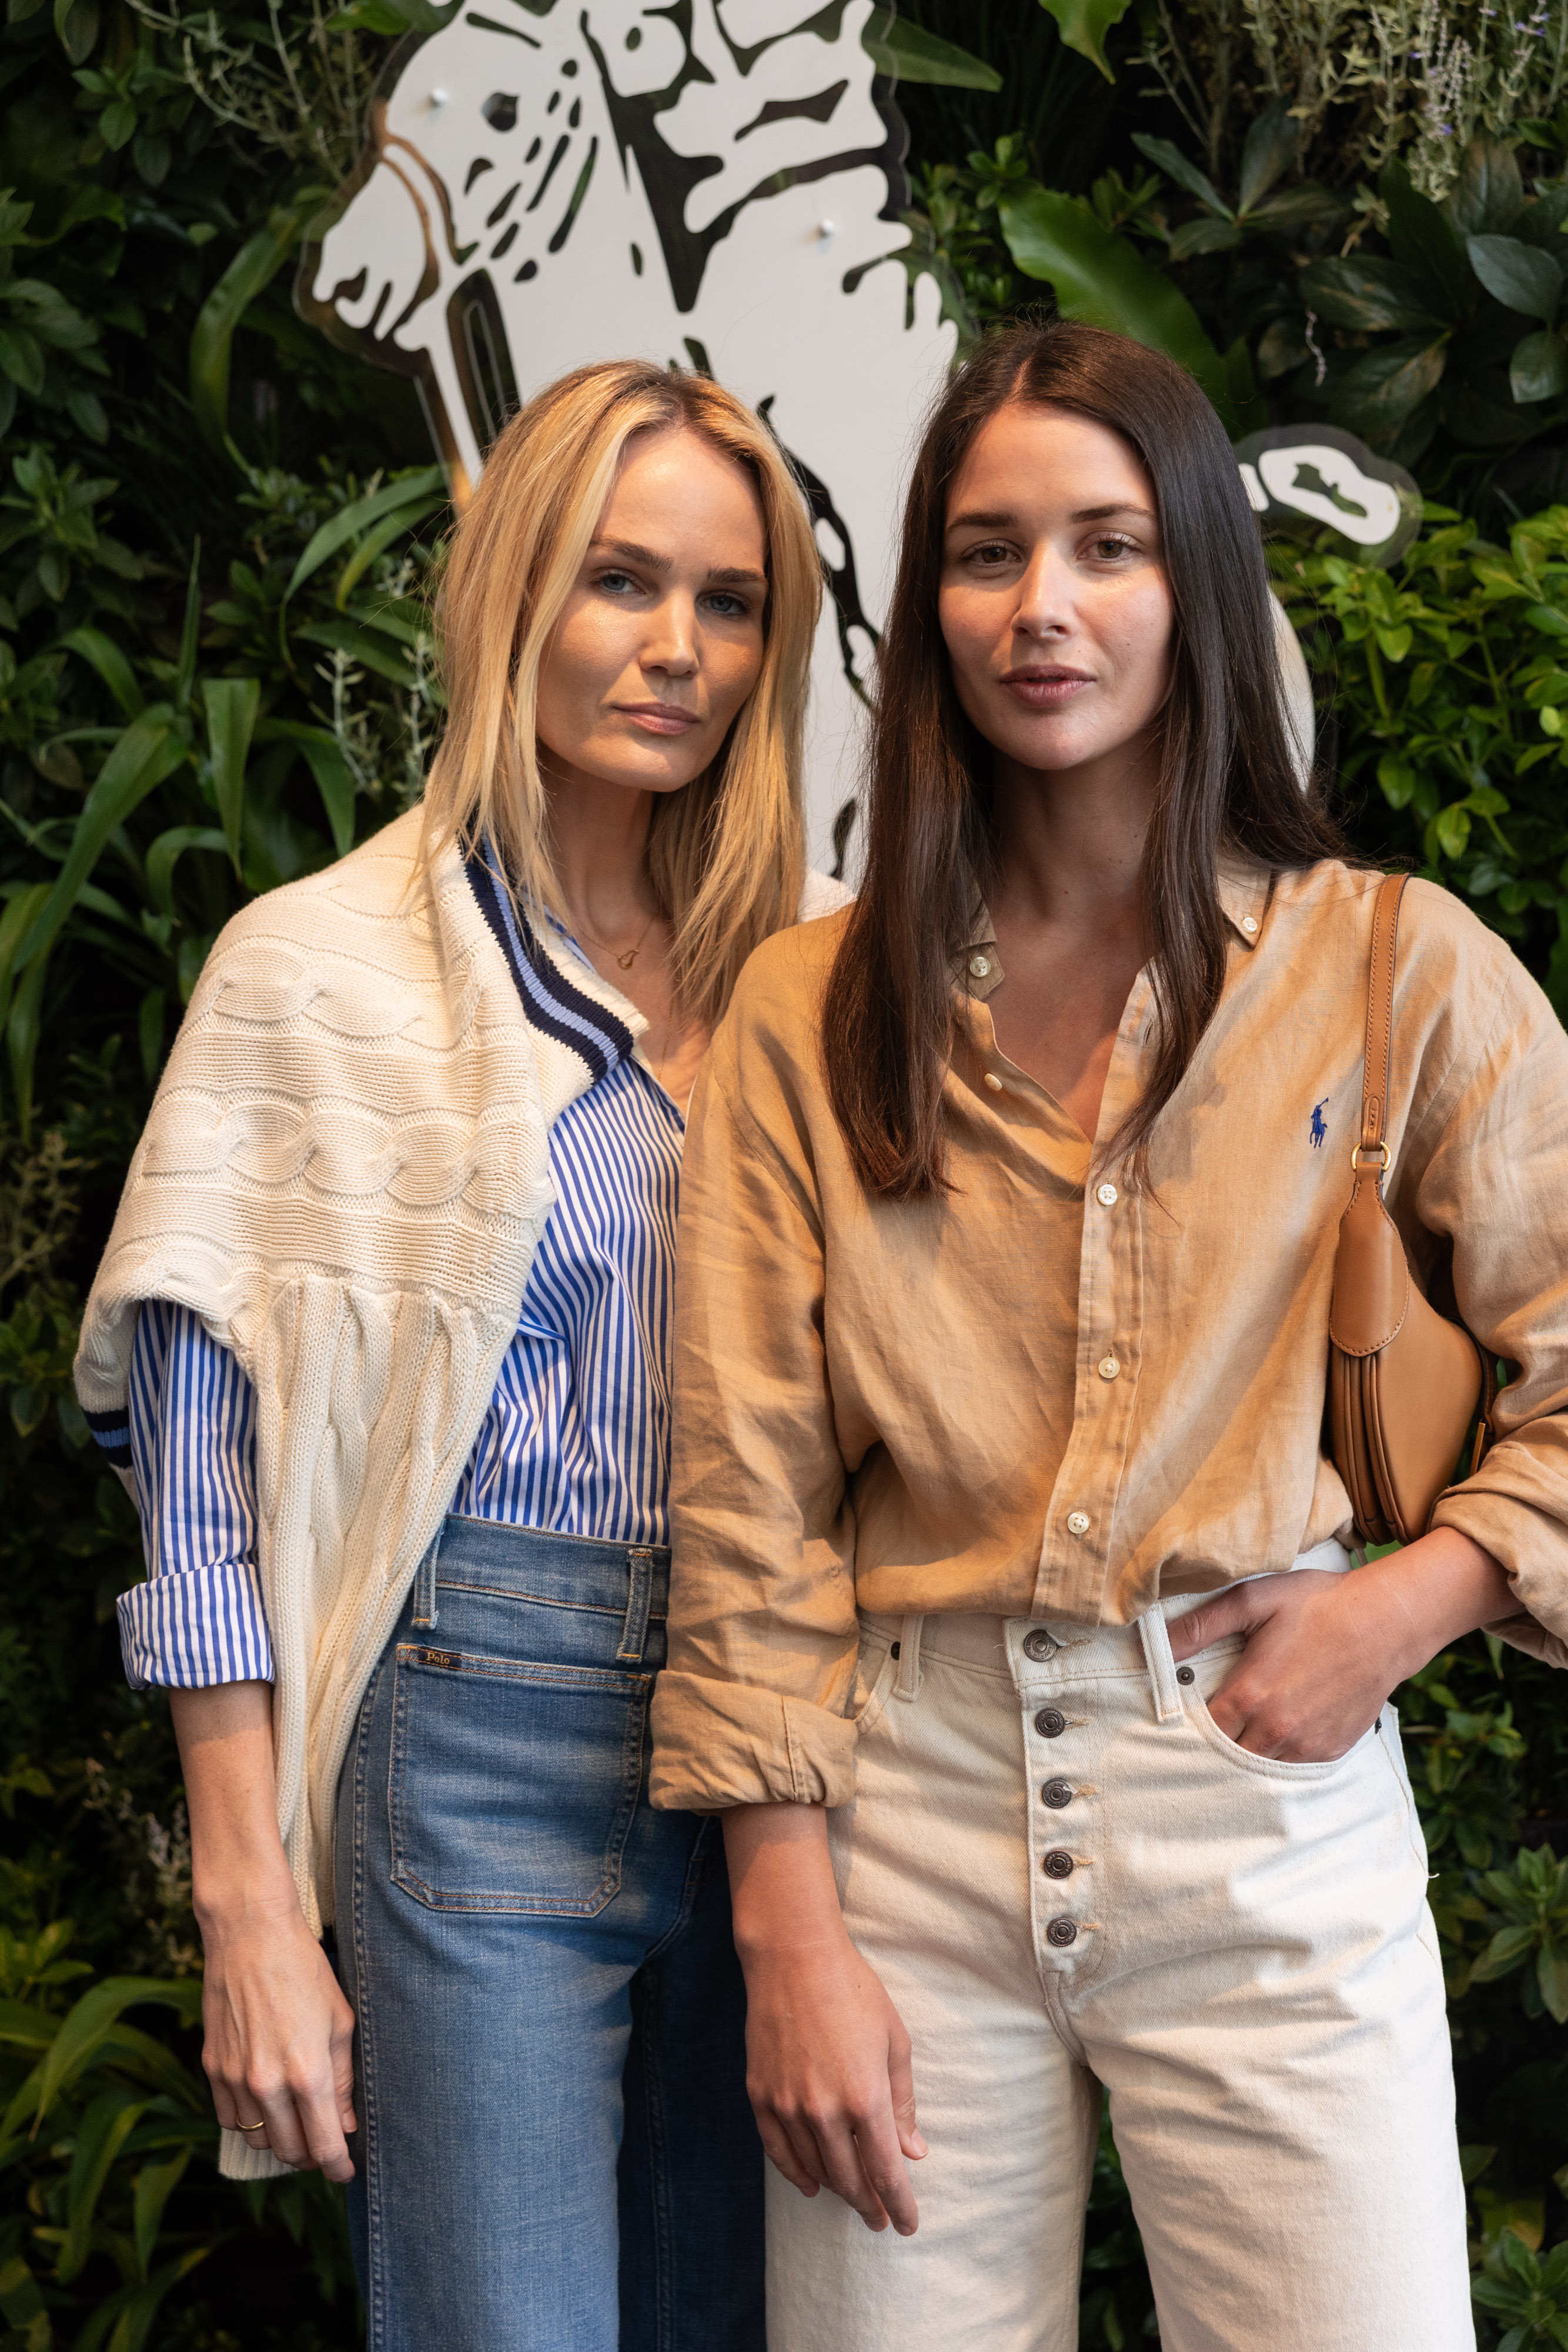 MELBOURNE, AUSTRALIA: Together with Ralph Lauren, GRAZIA Australia welcomed guests to the first day of the Australian Open on January 14. The American fashion house, the official outfitter of the 2024 Australian tournament for thr fourth consecutive year, played host inside its luxurious, on-site hospitality suite at Melbourne Park before inviting guests to spend the afternoon watching some world-class tennis at Rod Laver Arena. Actress Olivia de Jonge, and models Montana Cox, Nick Trulove and Bella Thomas, were in attendance, as were stylish faces Brooke Testoni, Sara Crampton and Cat Spanti. Artists and creatives Gabrielle Penfold, Phoebe Wolfe and social media creators Rowi Singh, Yemi Sul and Sarah Davidson rounded out the well-dressed guest list. Set against navy and white panelling with framed archival Ralph Lauren imagery on its walls—and with blue and white patterned cushions and small gold desk lamps— the suite nodded to many of Mr. Lauren’s classic homes, notably the outdoor area os his Bedford, New York abode built in 1919. As well as outfitting 4000 staff and officials at this year’s Open, the brand has also designed a new series of commemorative towels for the AO24, available exclusively at ralphlauren.com.au. Underscored by Ralph Lauren’s commitment to sustainability, both the uniforms and towels have been created with recycled polyester and with moisture-wicking properties and UV protection, a potent and essential fusion for active play in the Australian sun. Yes, if there were a secondary tournament running adjacent to the on-the-court action at the Australian Open – one which saw the sponsor suites battle it out for the most glamorous guest experience – Ralph Lauren would take it in three straight sets. Take a peek at the stylish guest list below. 